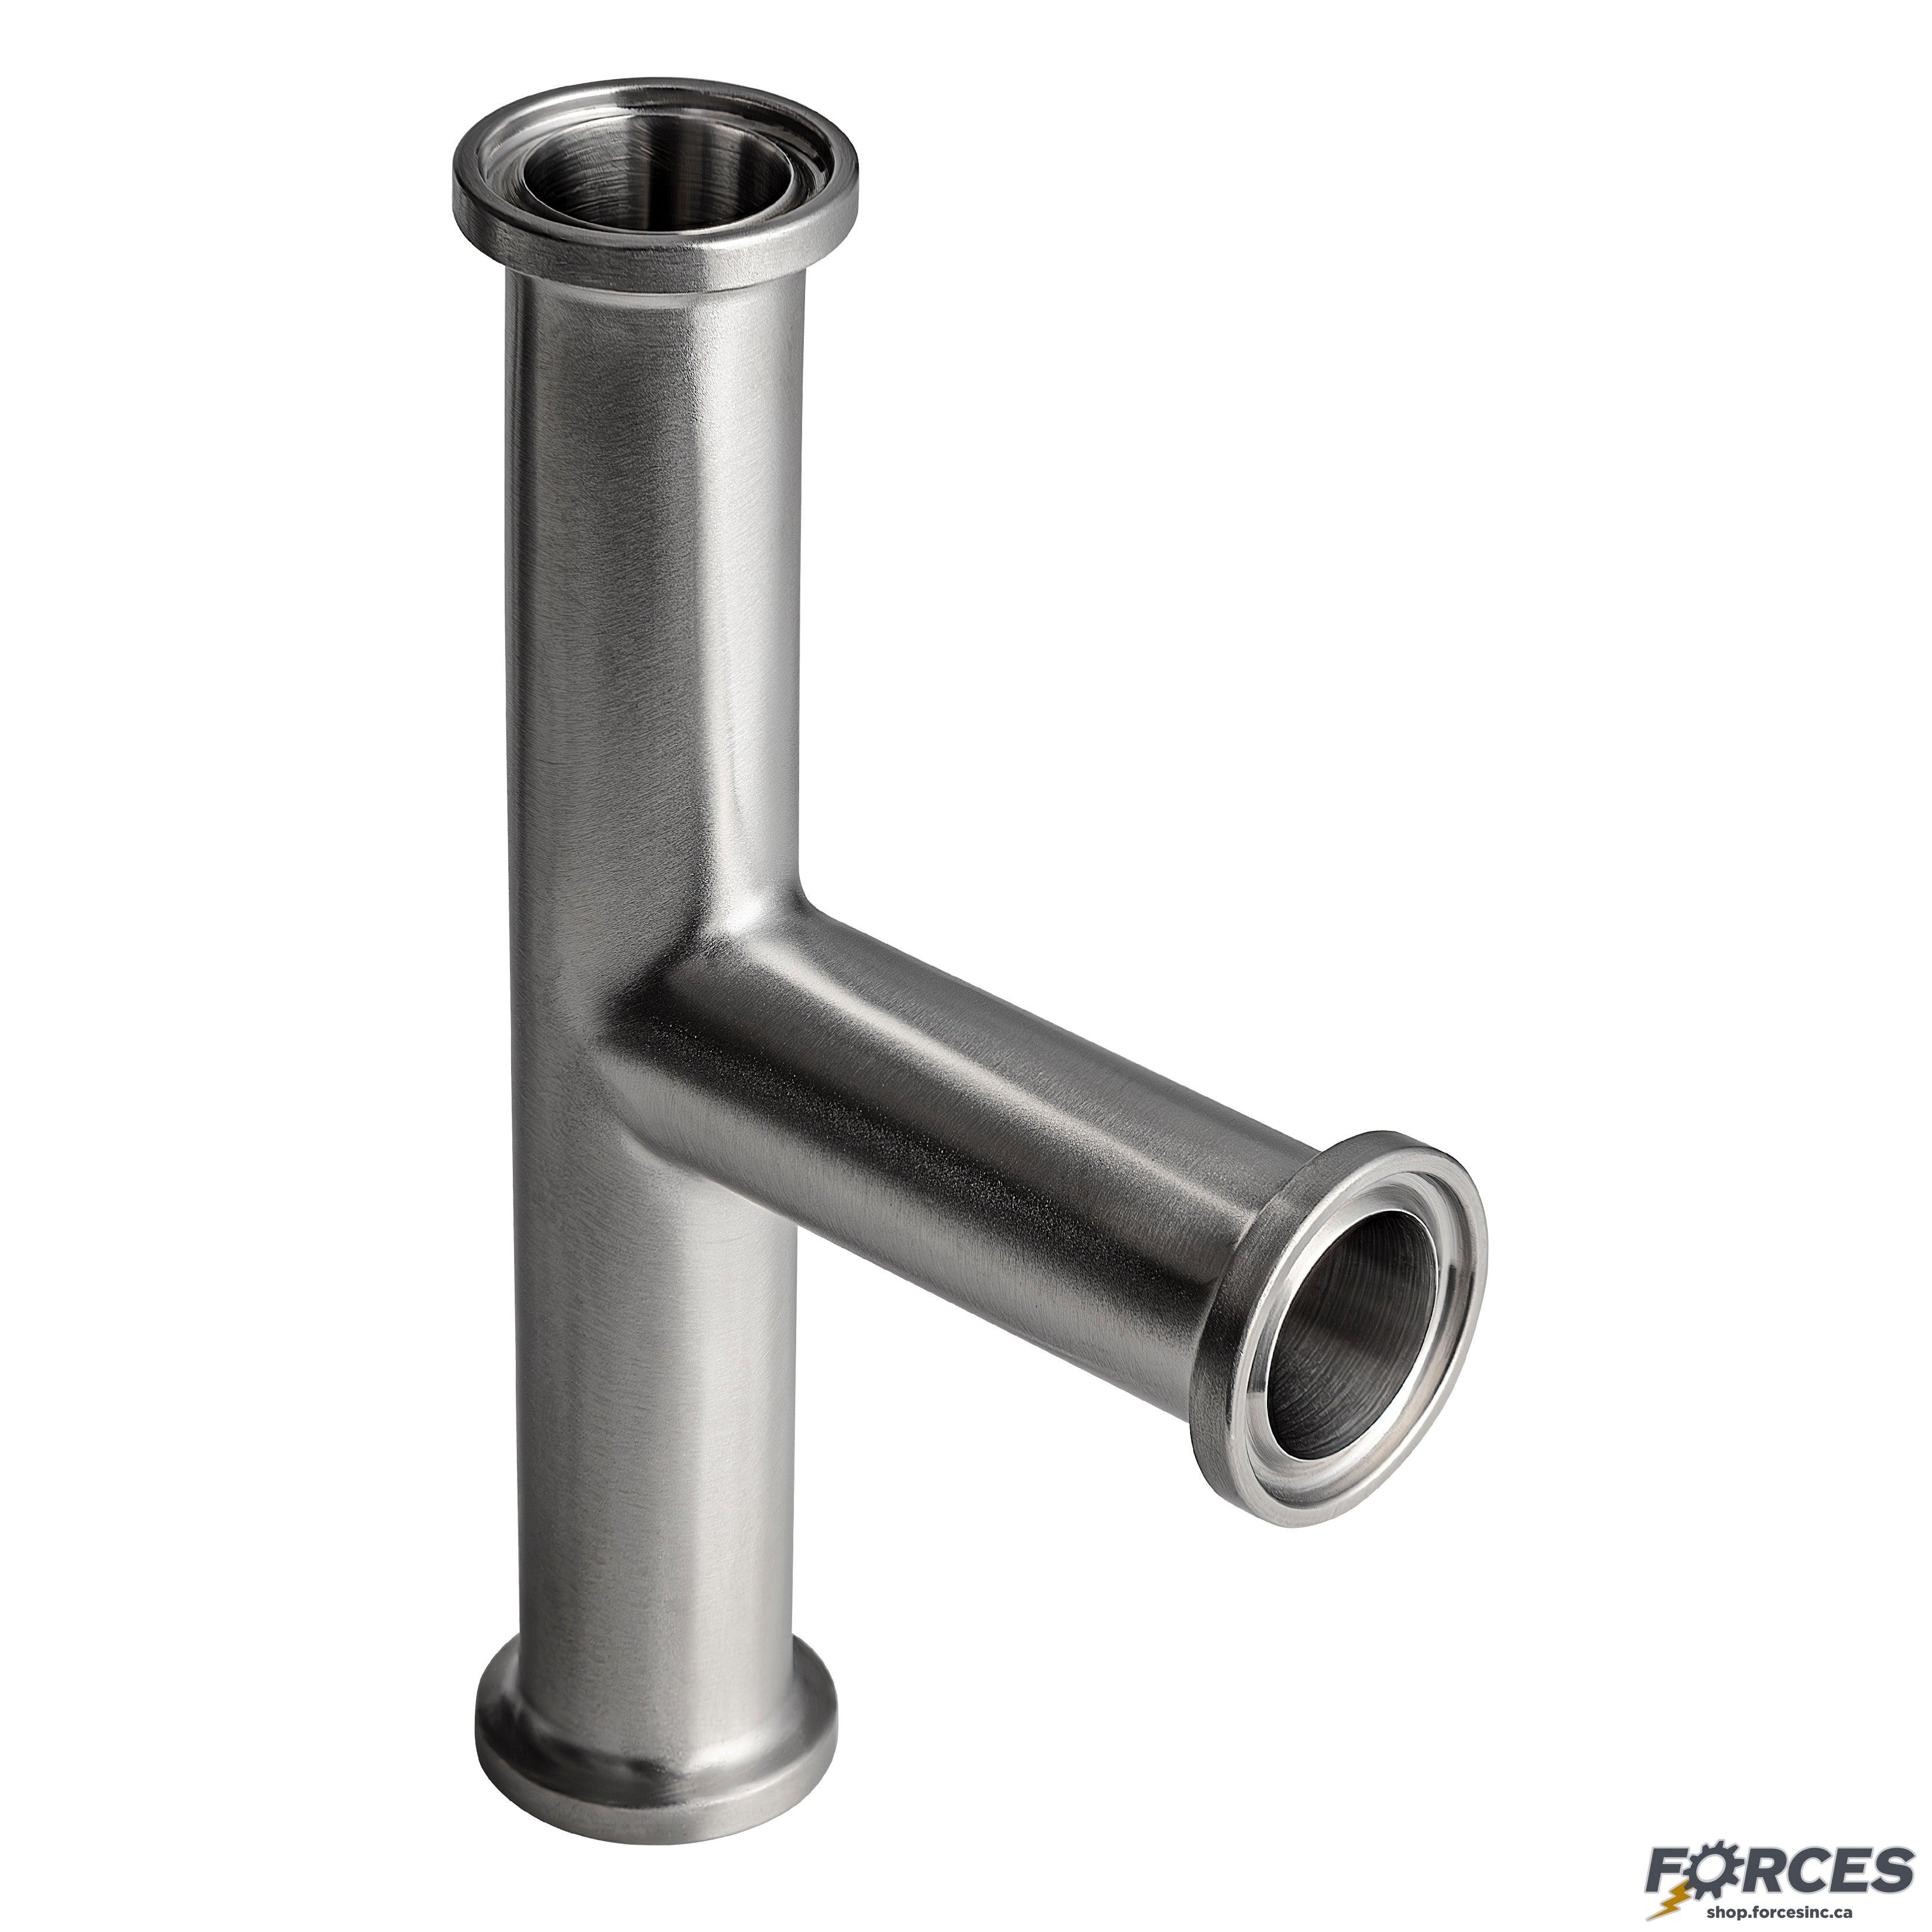 2-1/2" Tri-Clamp Tee - Stainless Steel 304 - Forces Inc